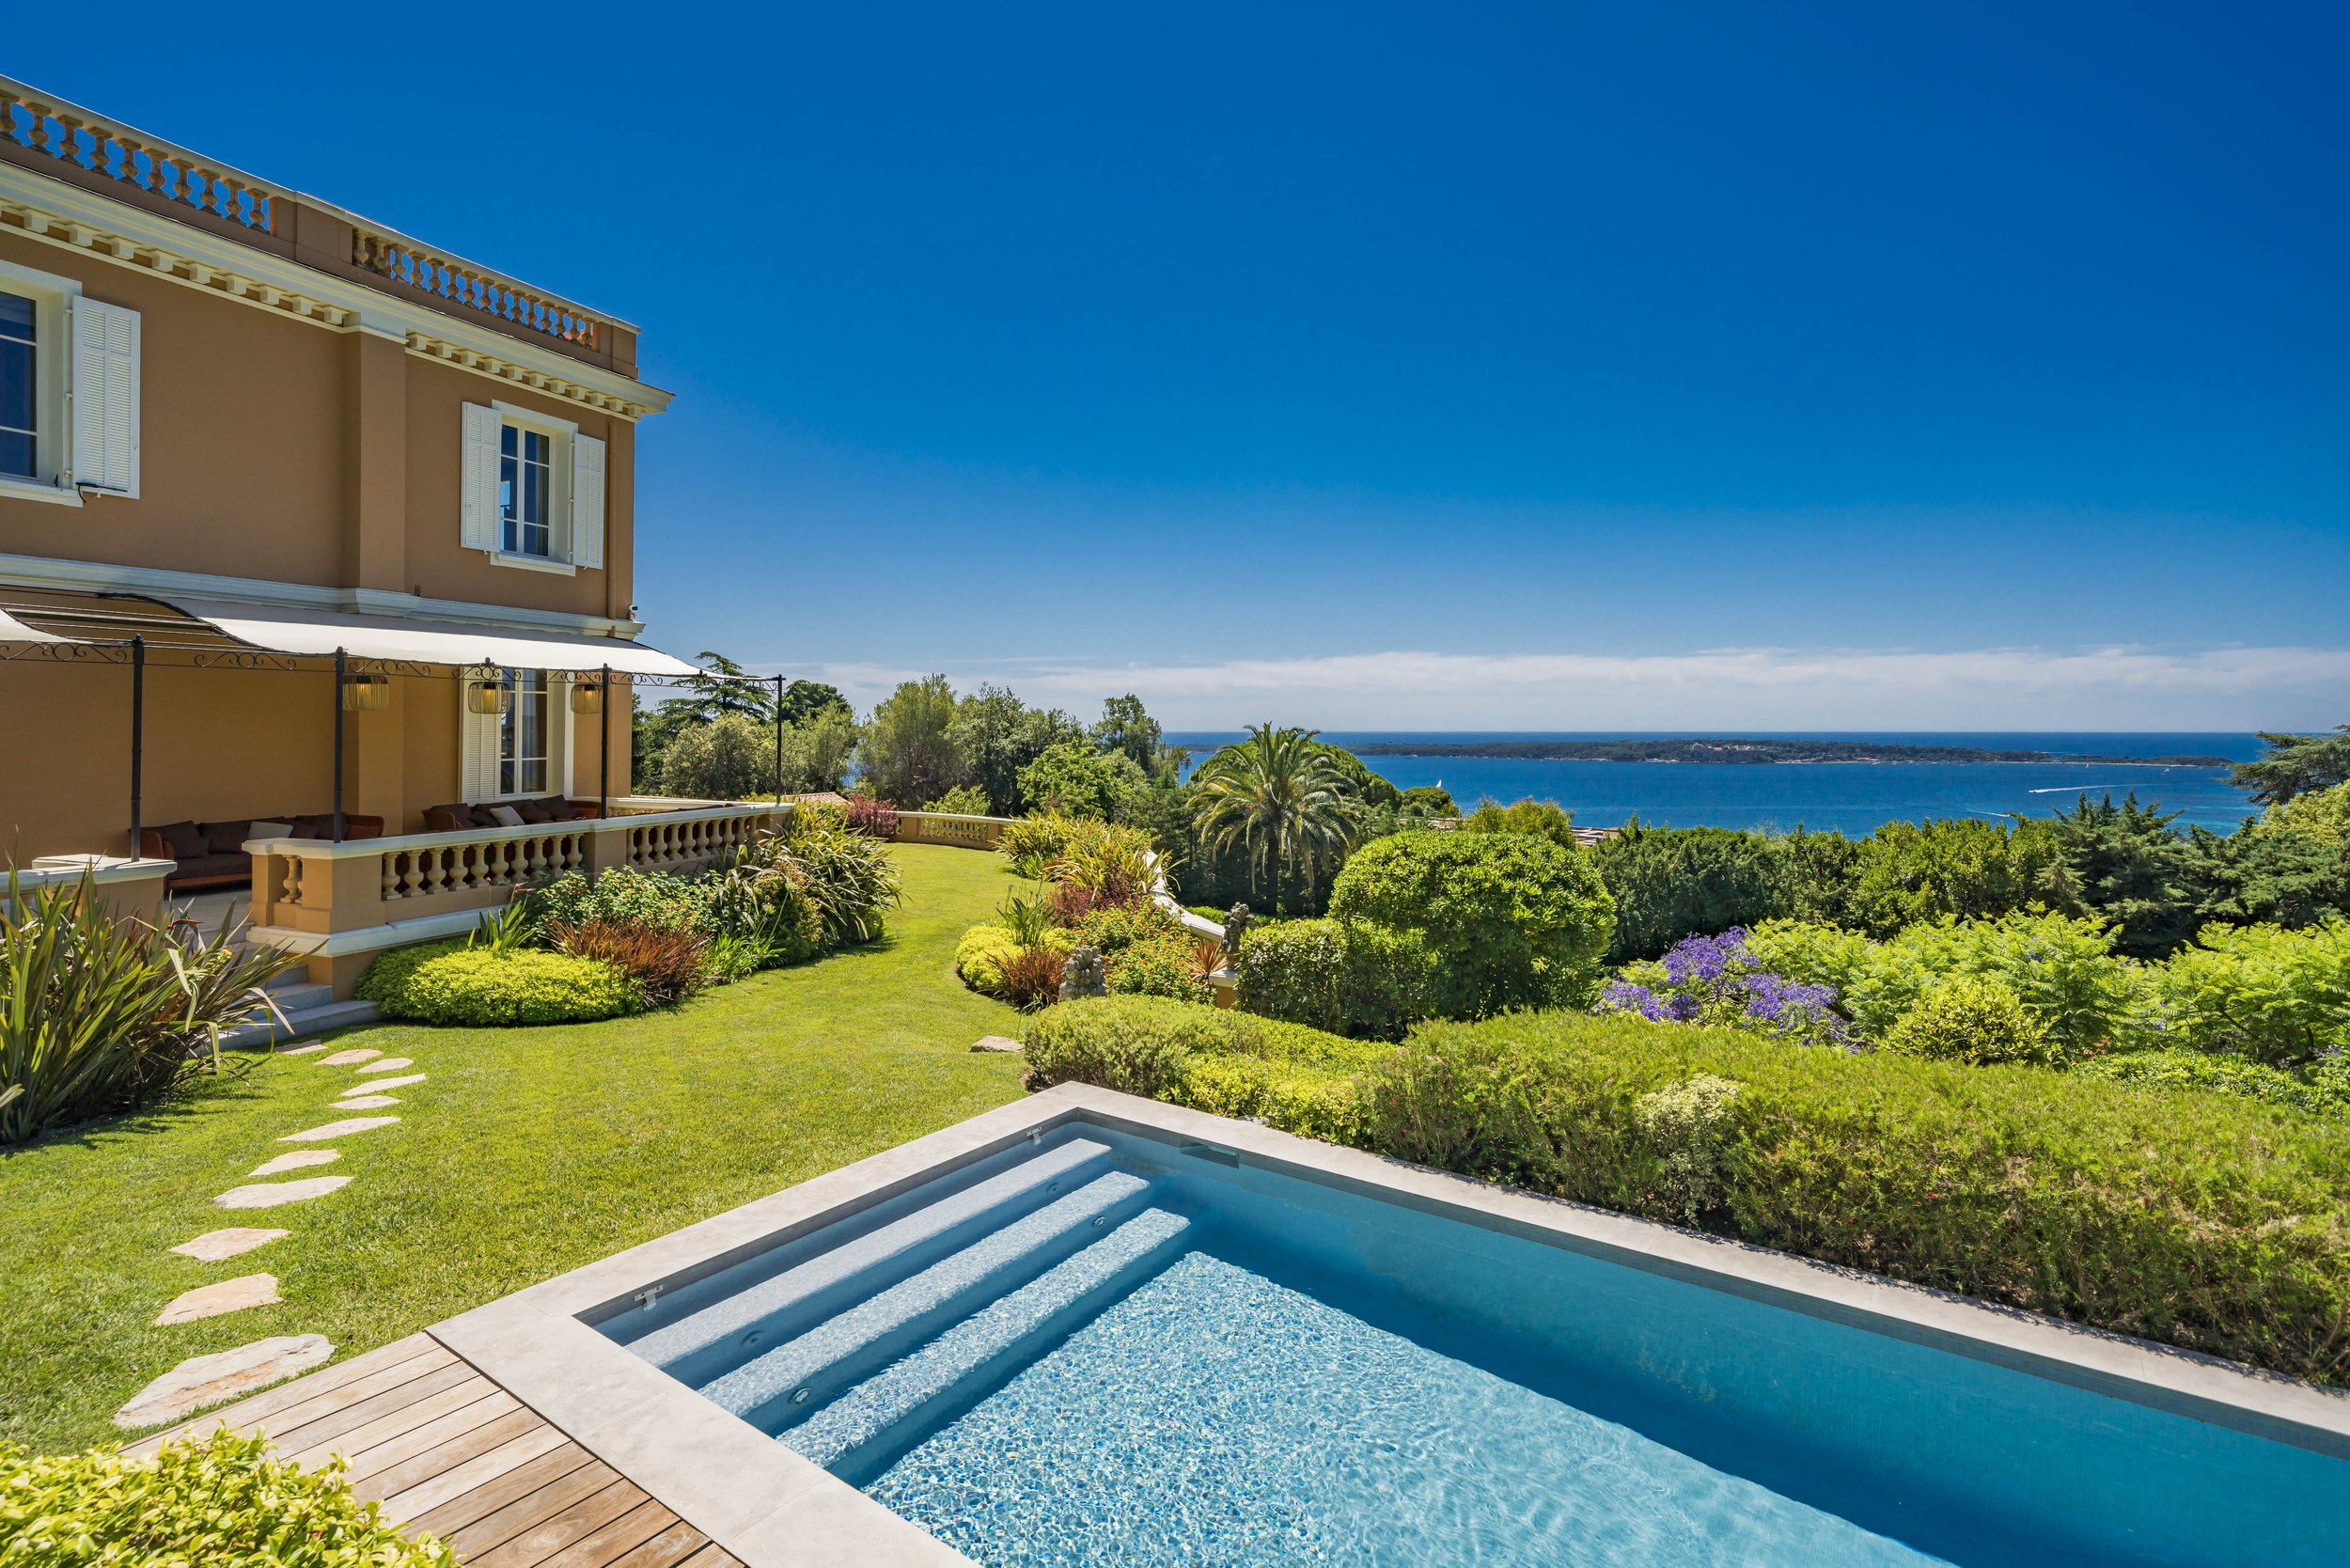 Francis York Luxury Holiday Rental in the Hills of Cannes, France 36.jpg